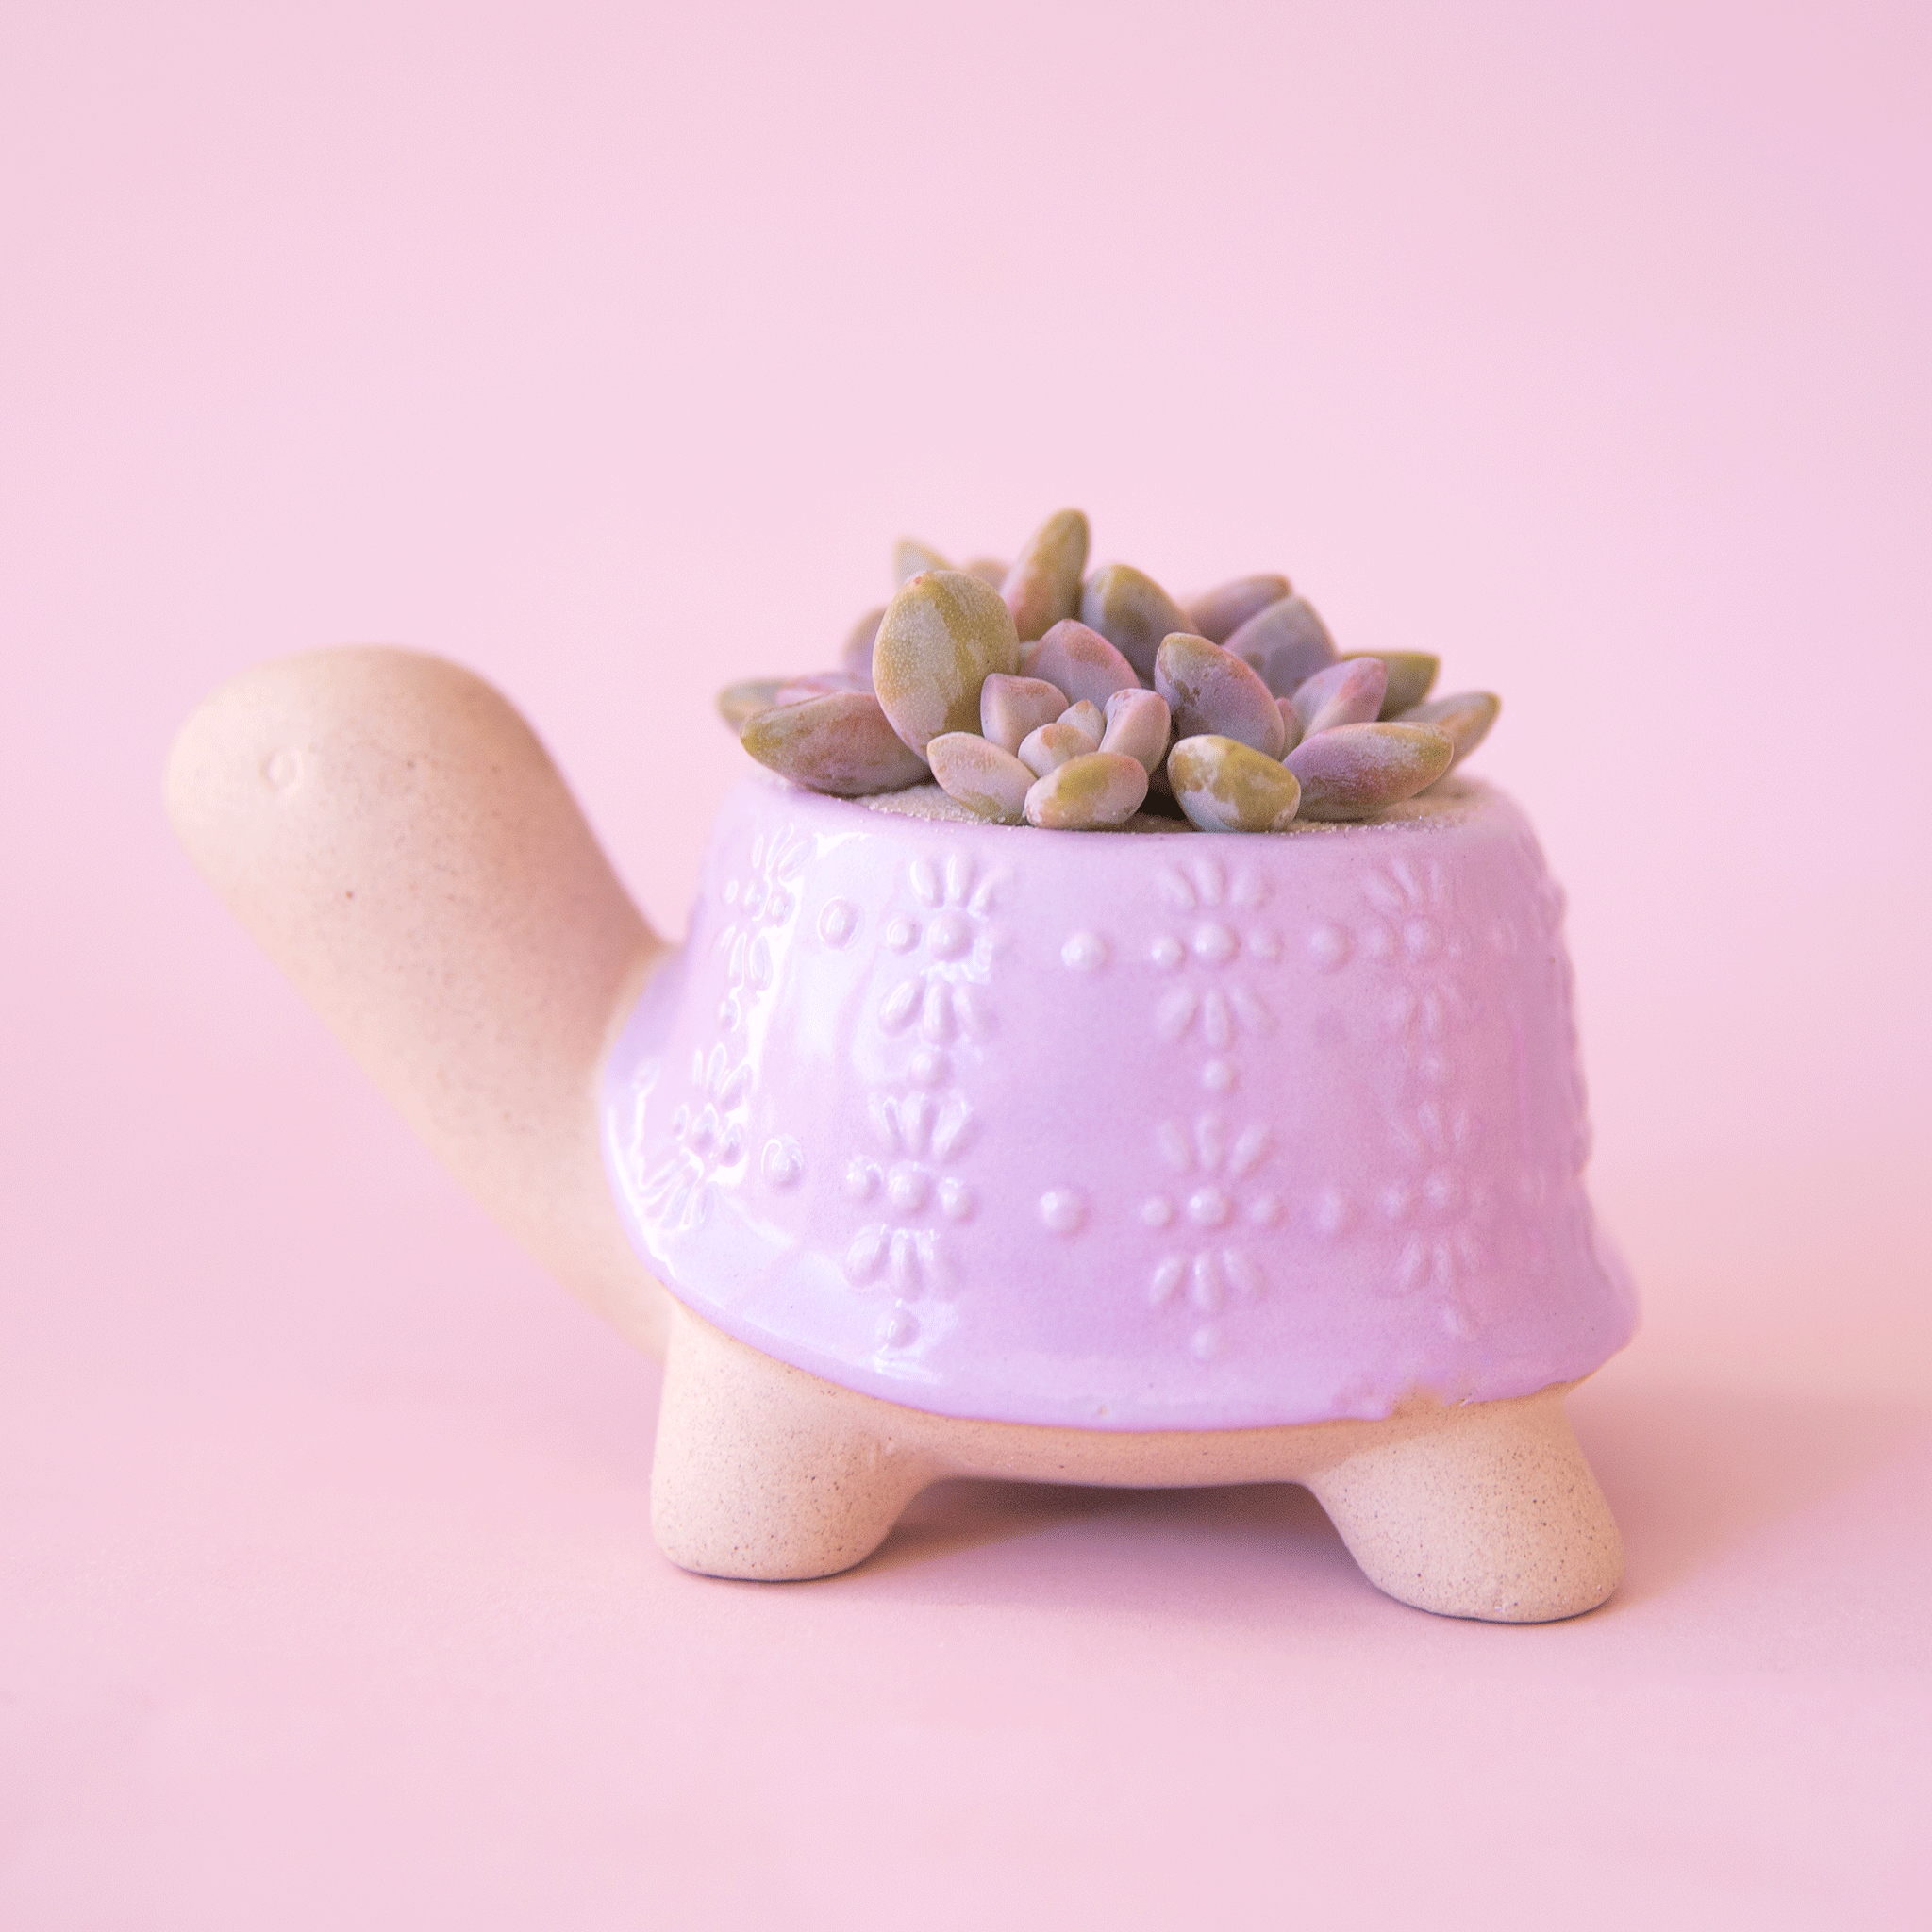 On a light pink background is lilac ceramic turtle shaped planter.